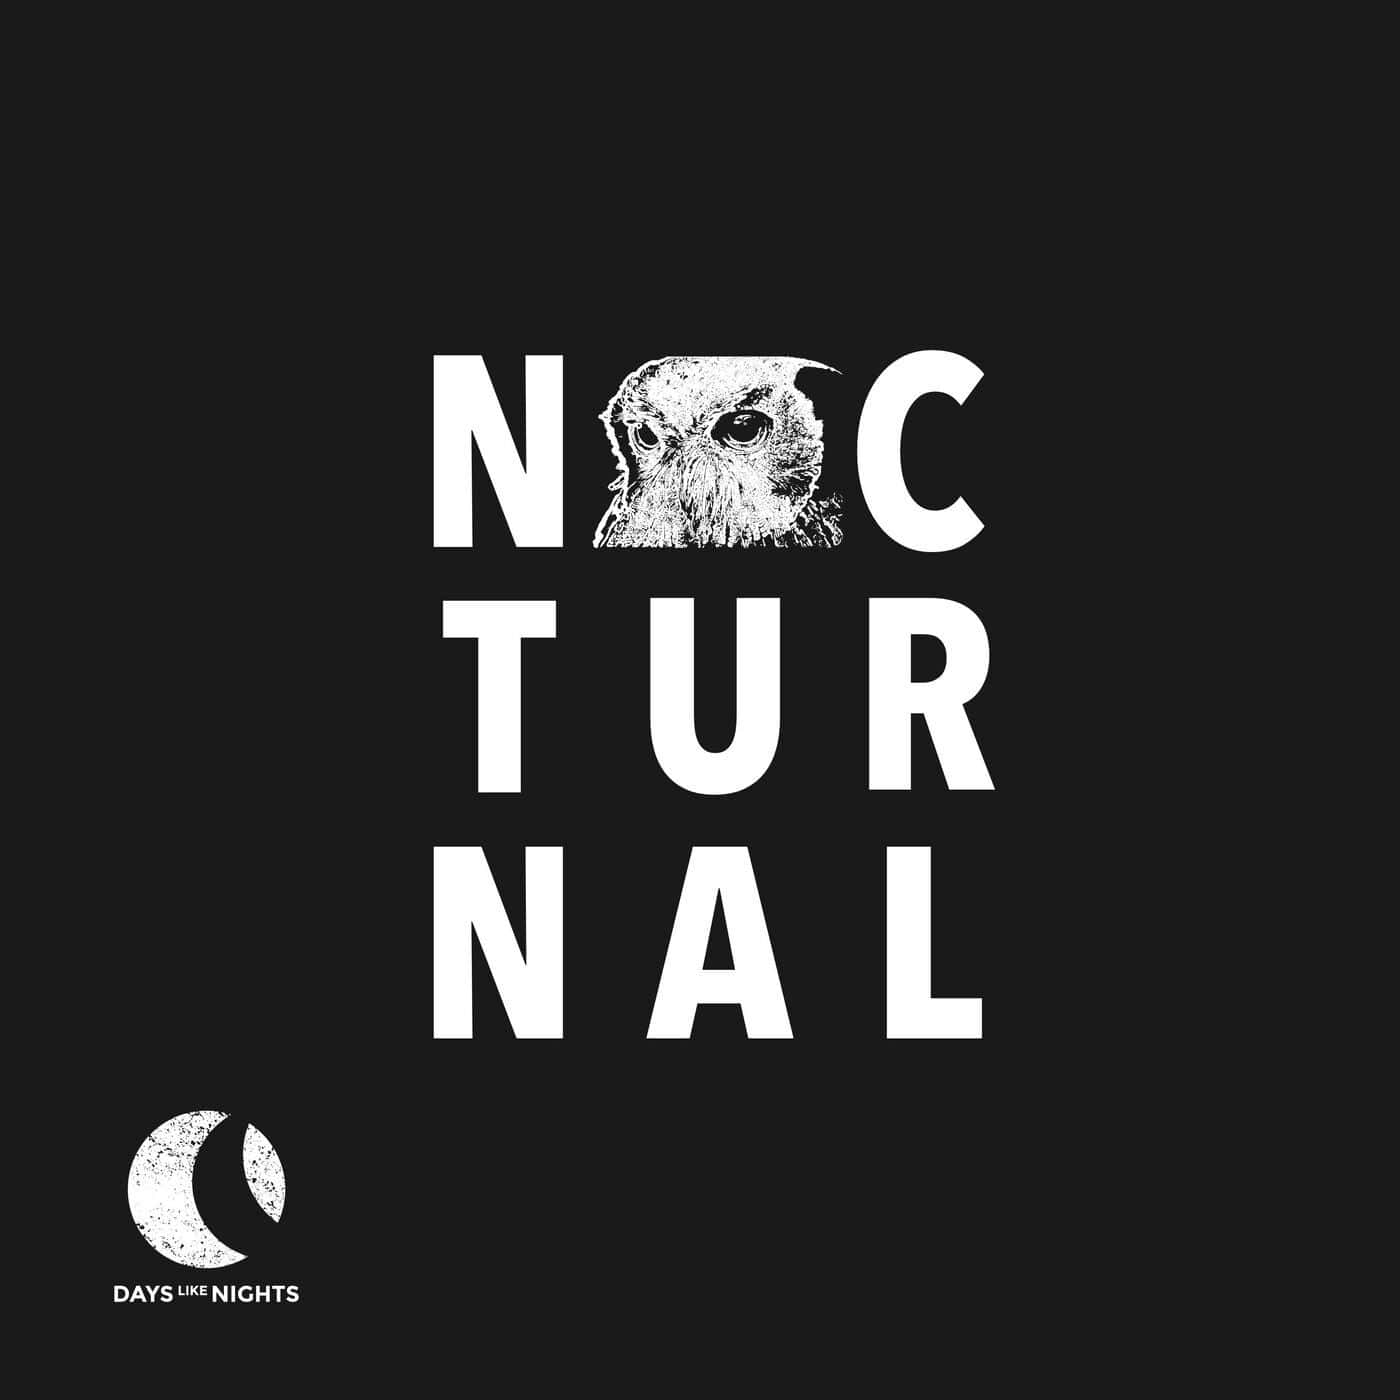 Download VA - Nocturnal 008 on Electrobuzz